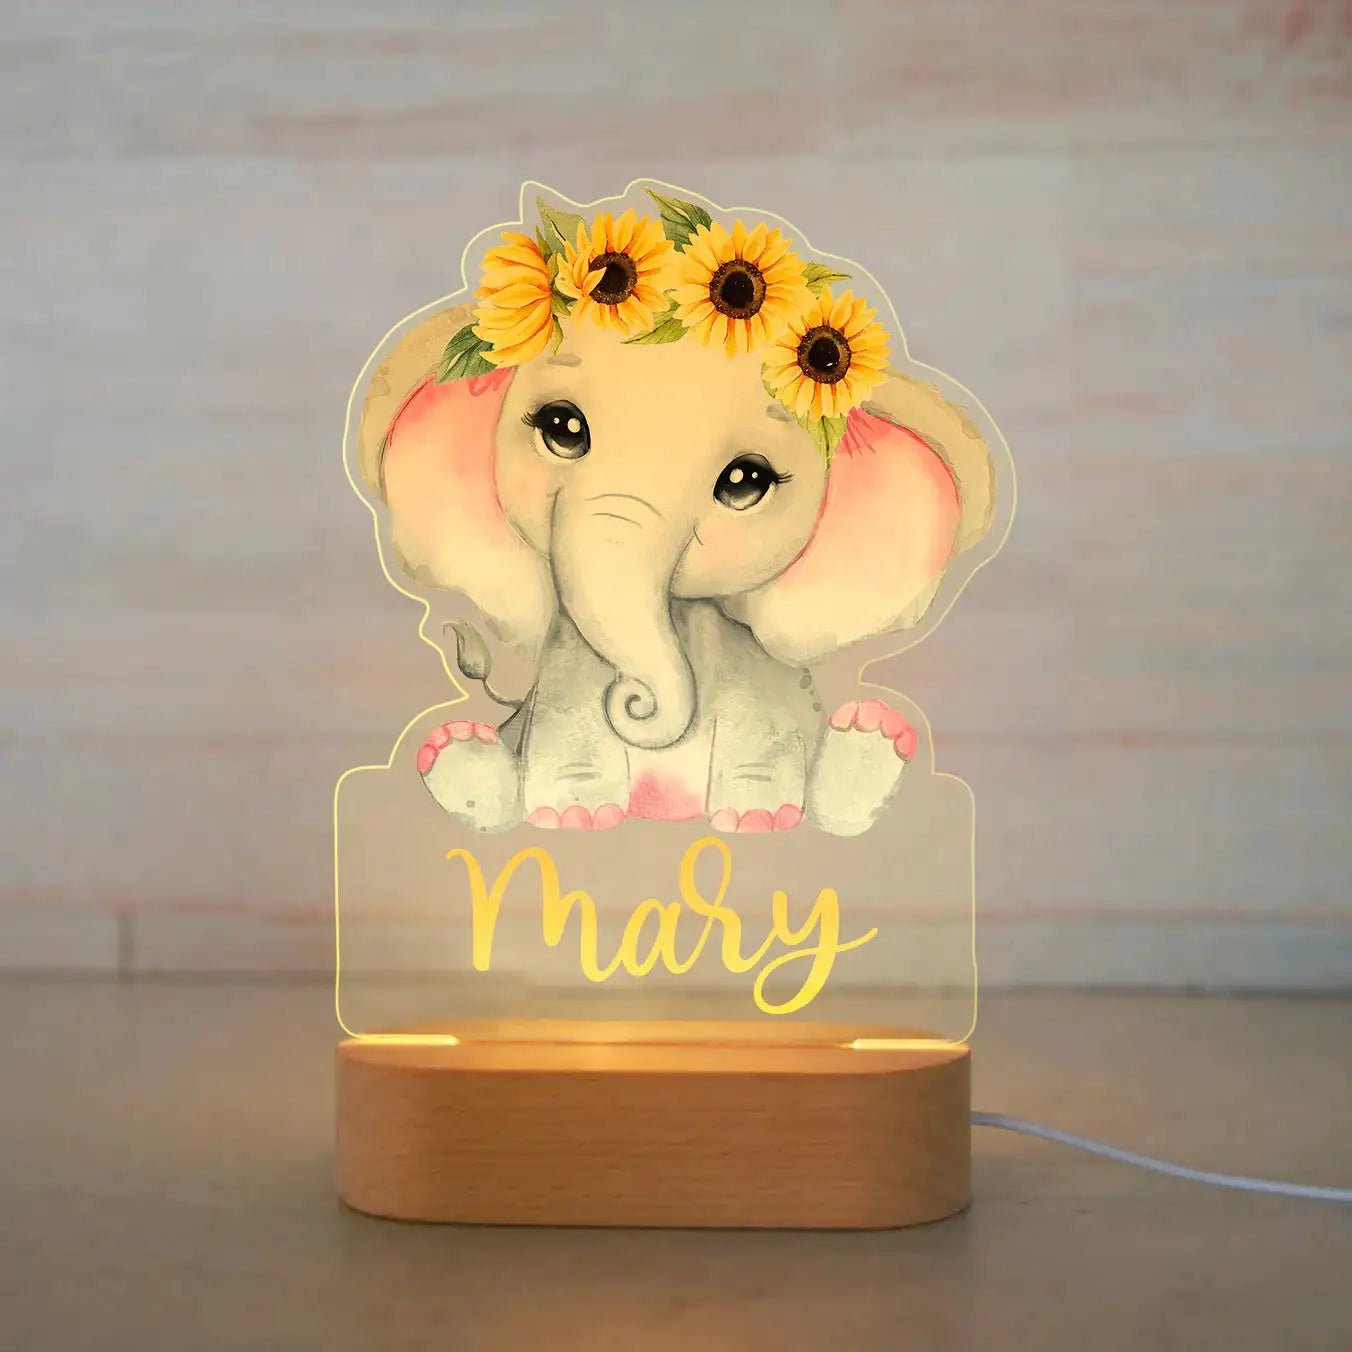 Customized Animal-themed Night Light for Kids - Personalized with Child's Name, Acrylic Lamp for Bedroom Decor Warm Light / 21Elephant